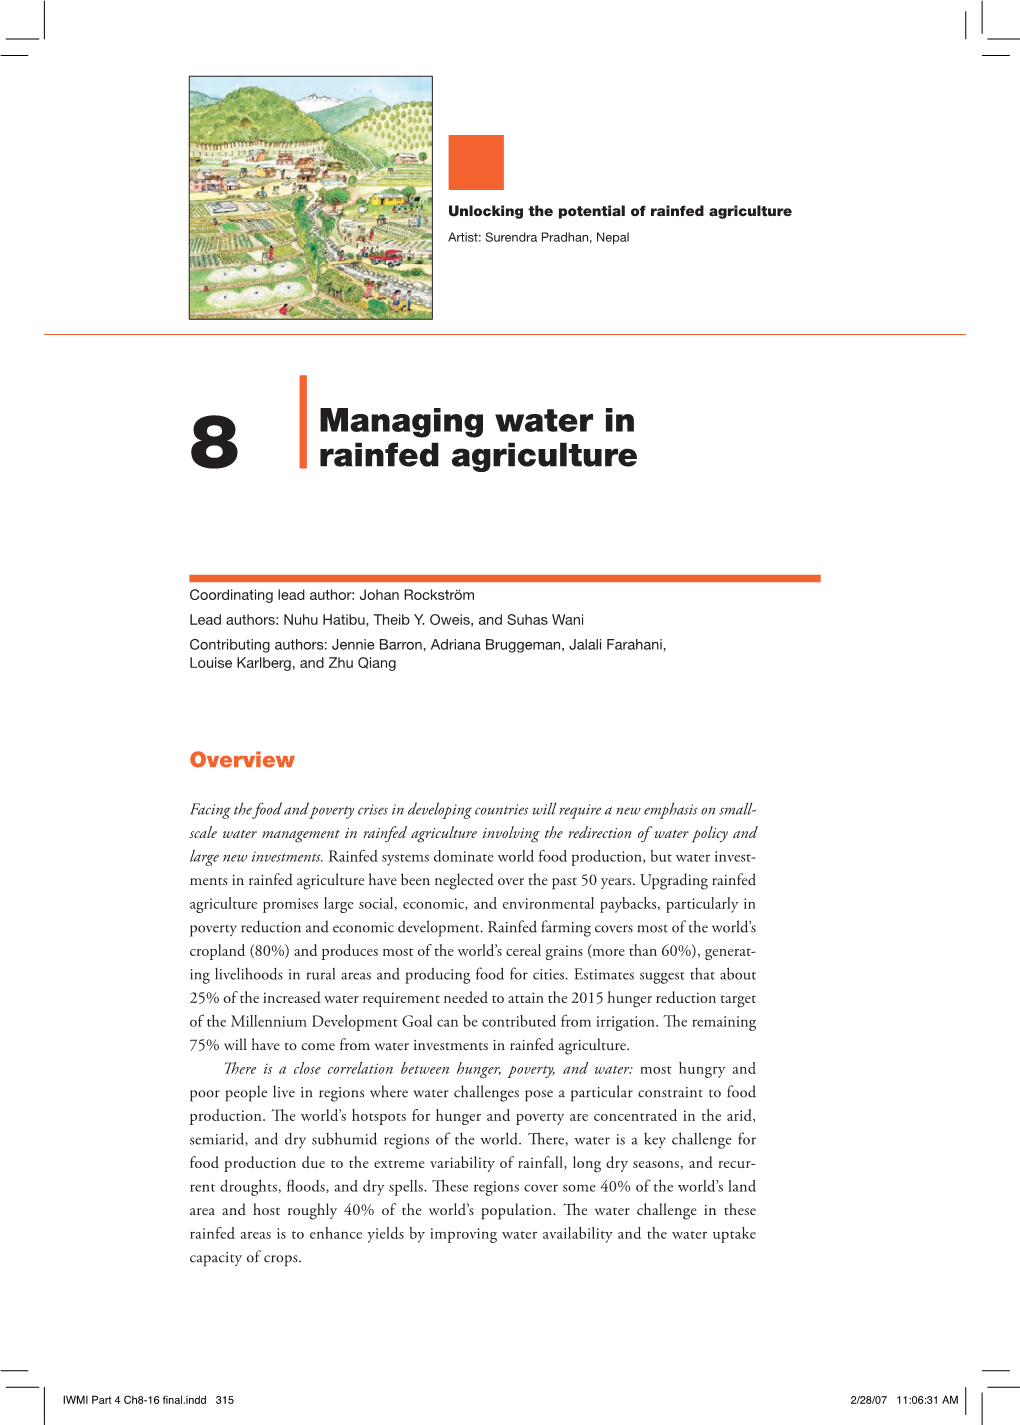 8 Managing Water in Rainfed Agriculture